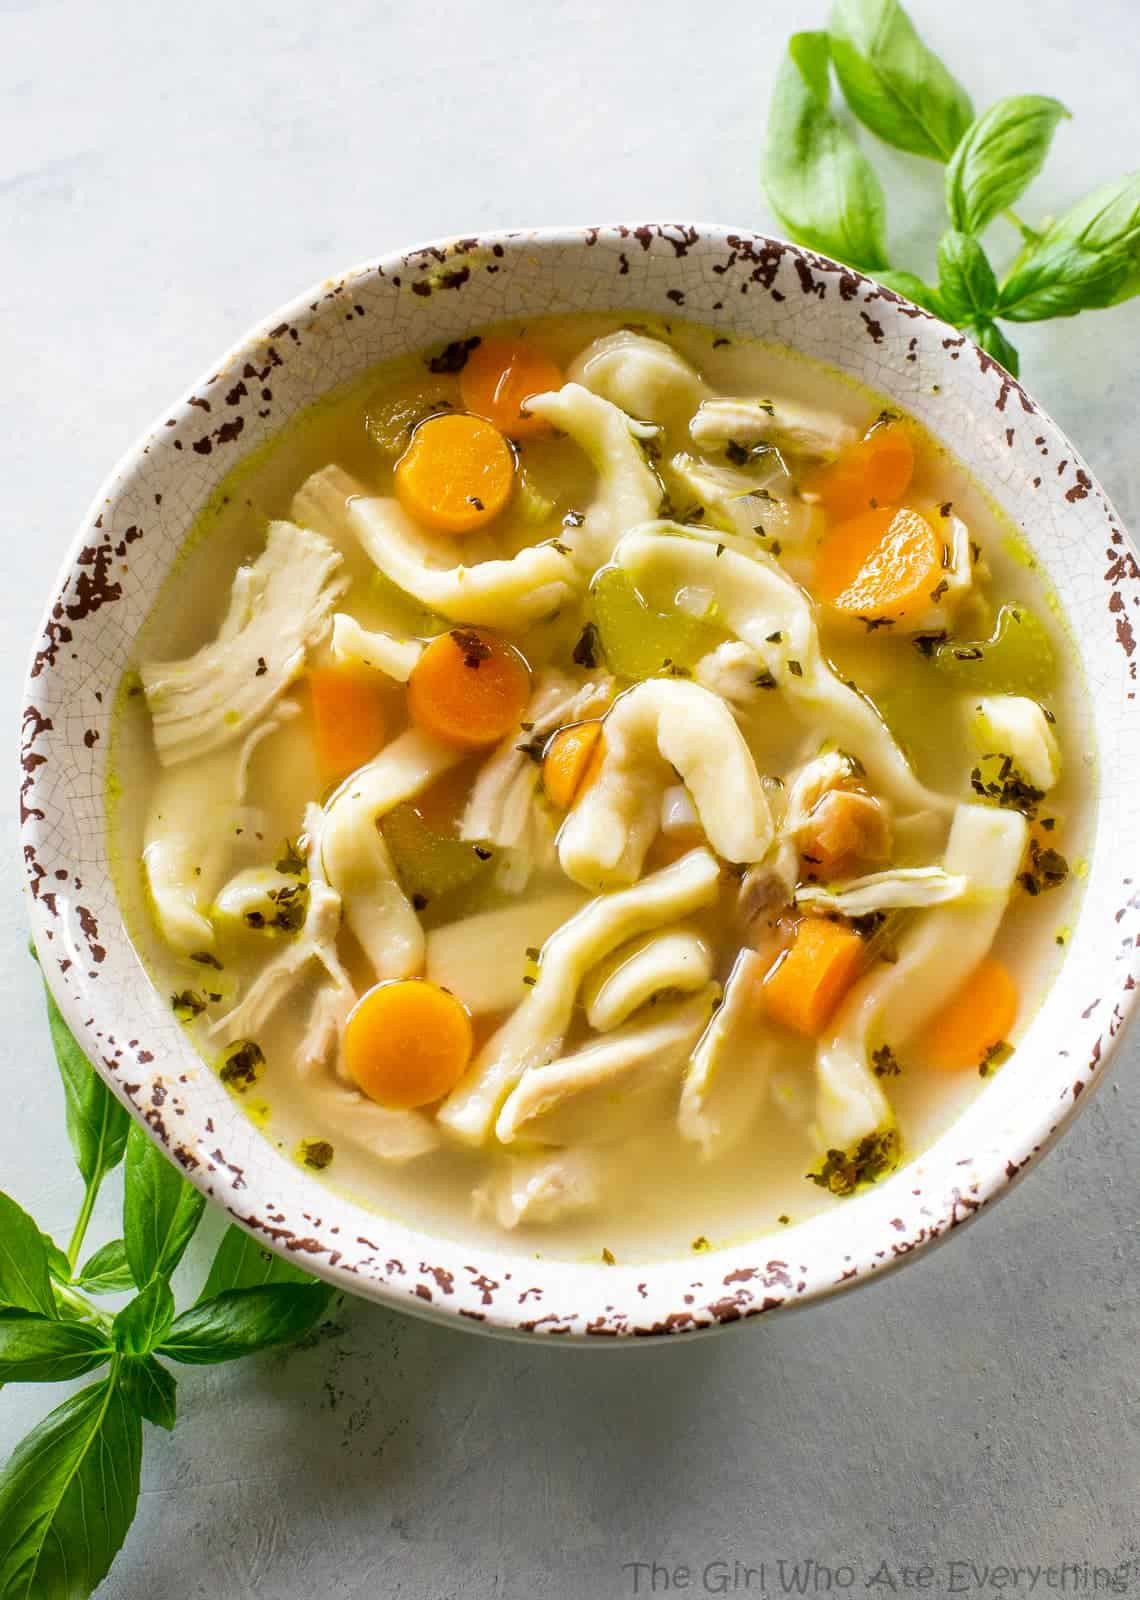 Best Chicken Noodle Soup Recipe
 Homemade Chicken Noodle Soup The Girl Who Ate Everything